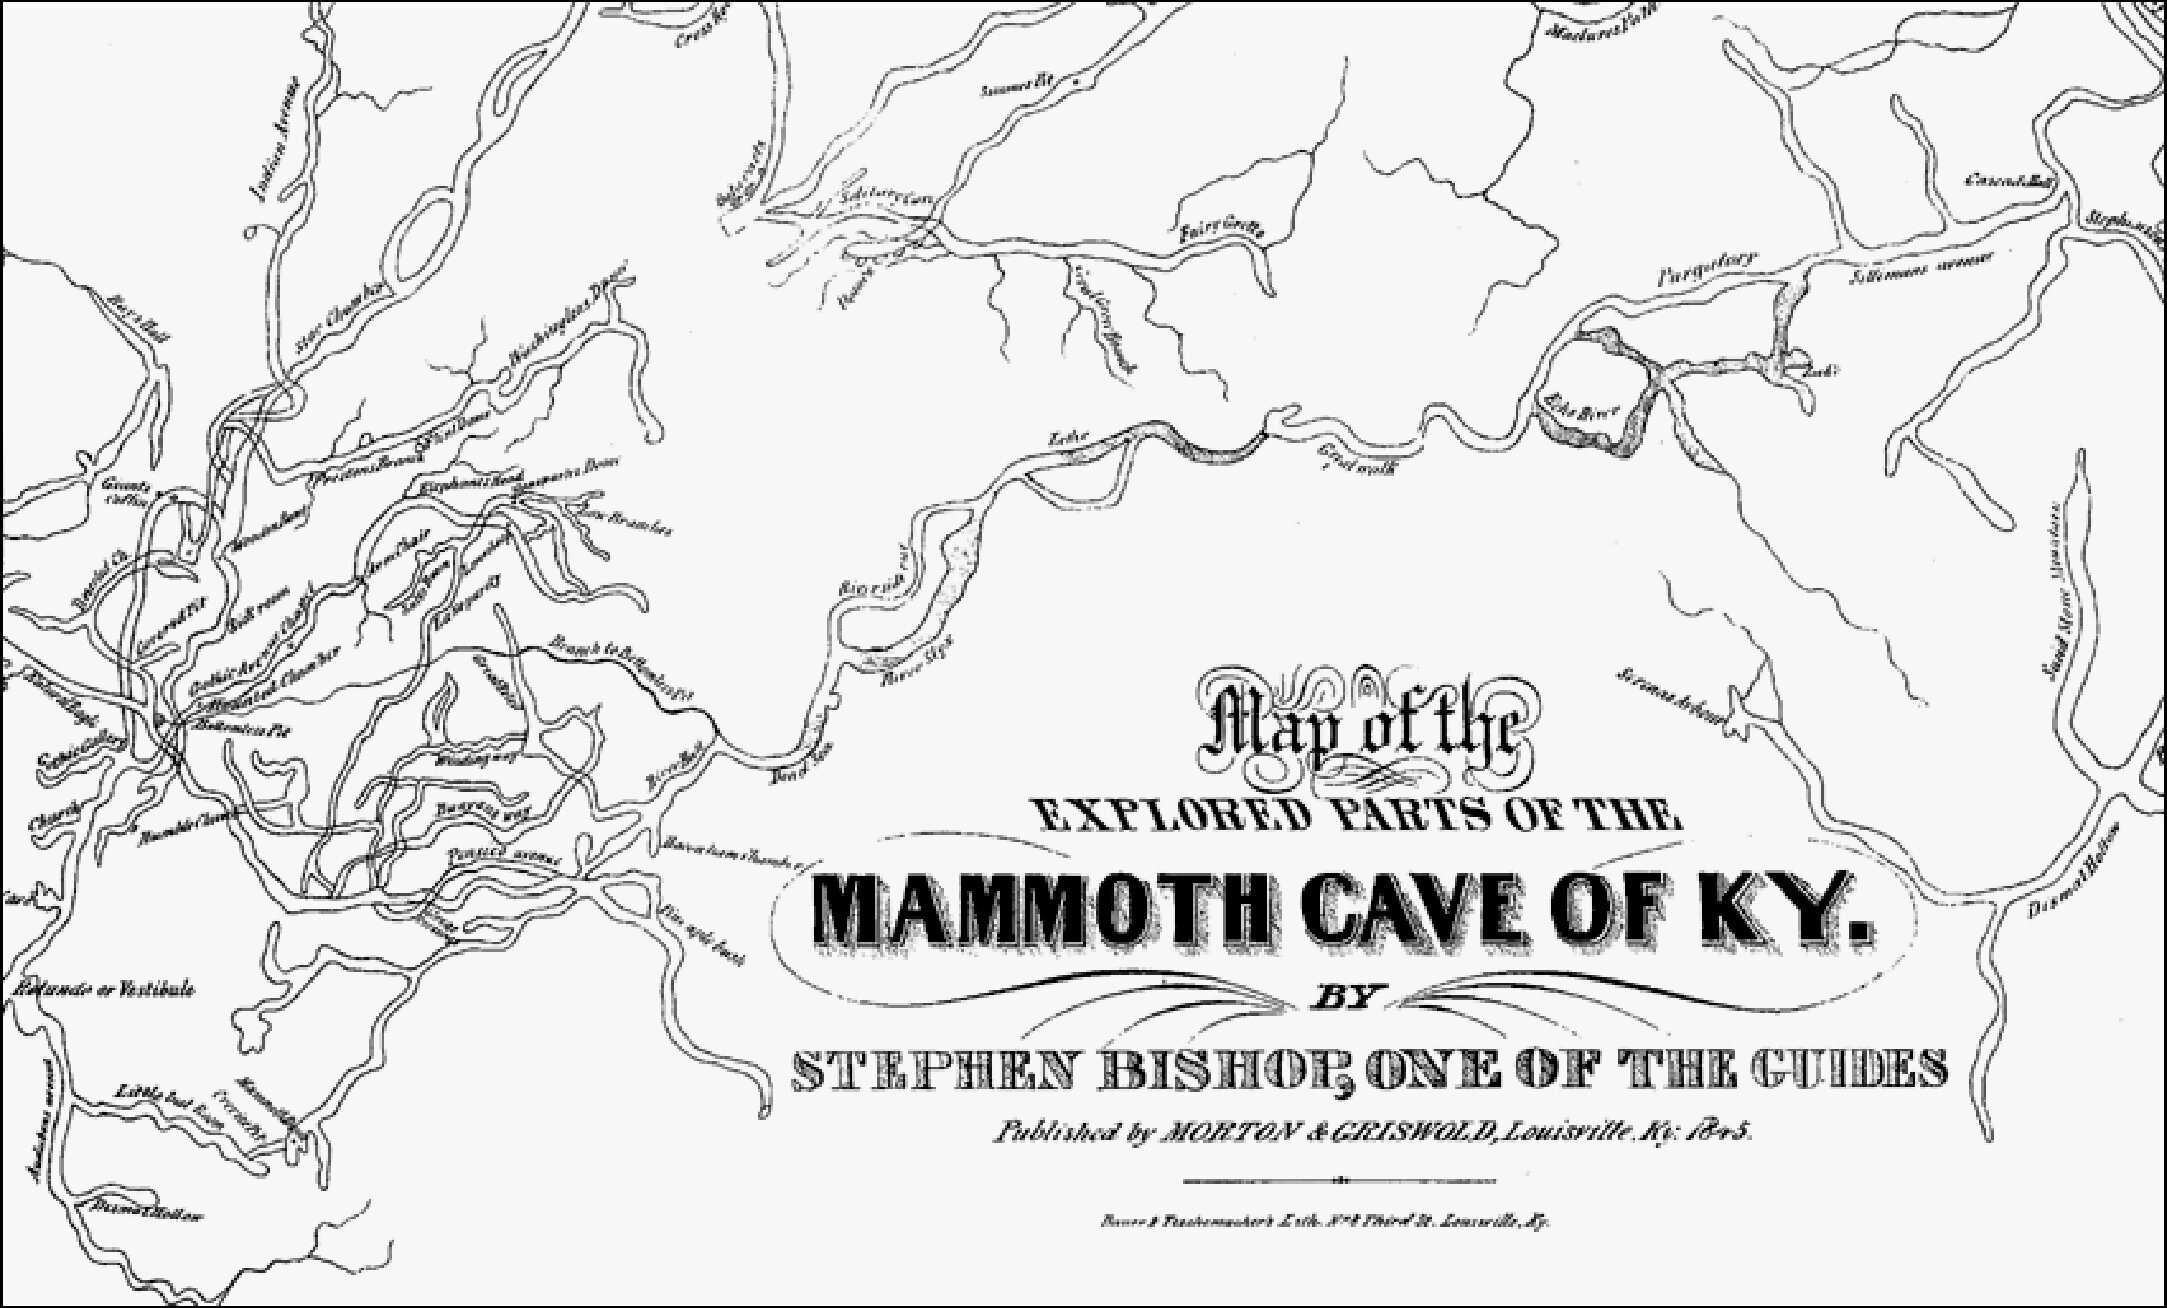  Mammoth Cave map drawn by Stephen Bishop. Image courtesy of the Cave Research Foundation. 